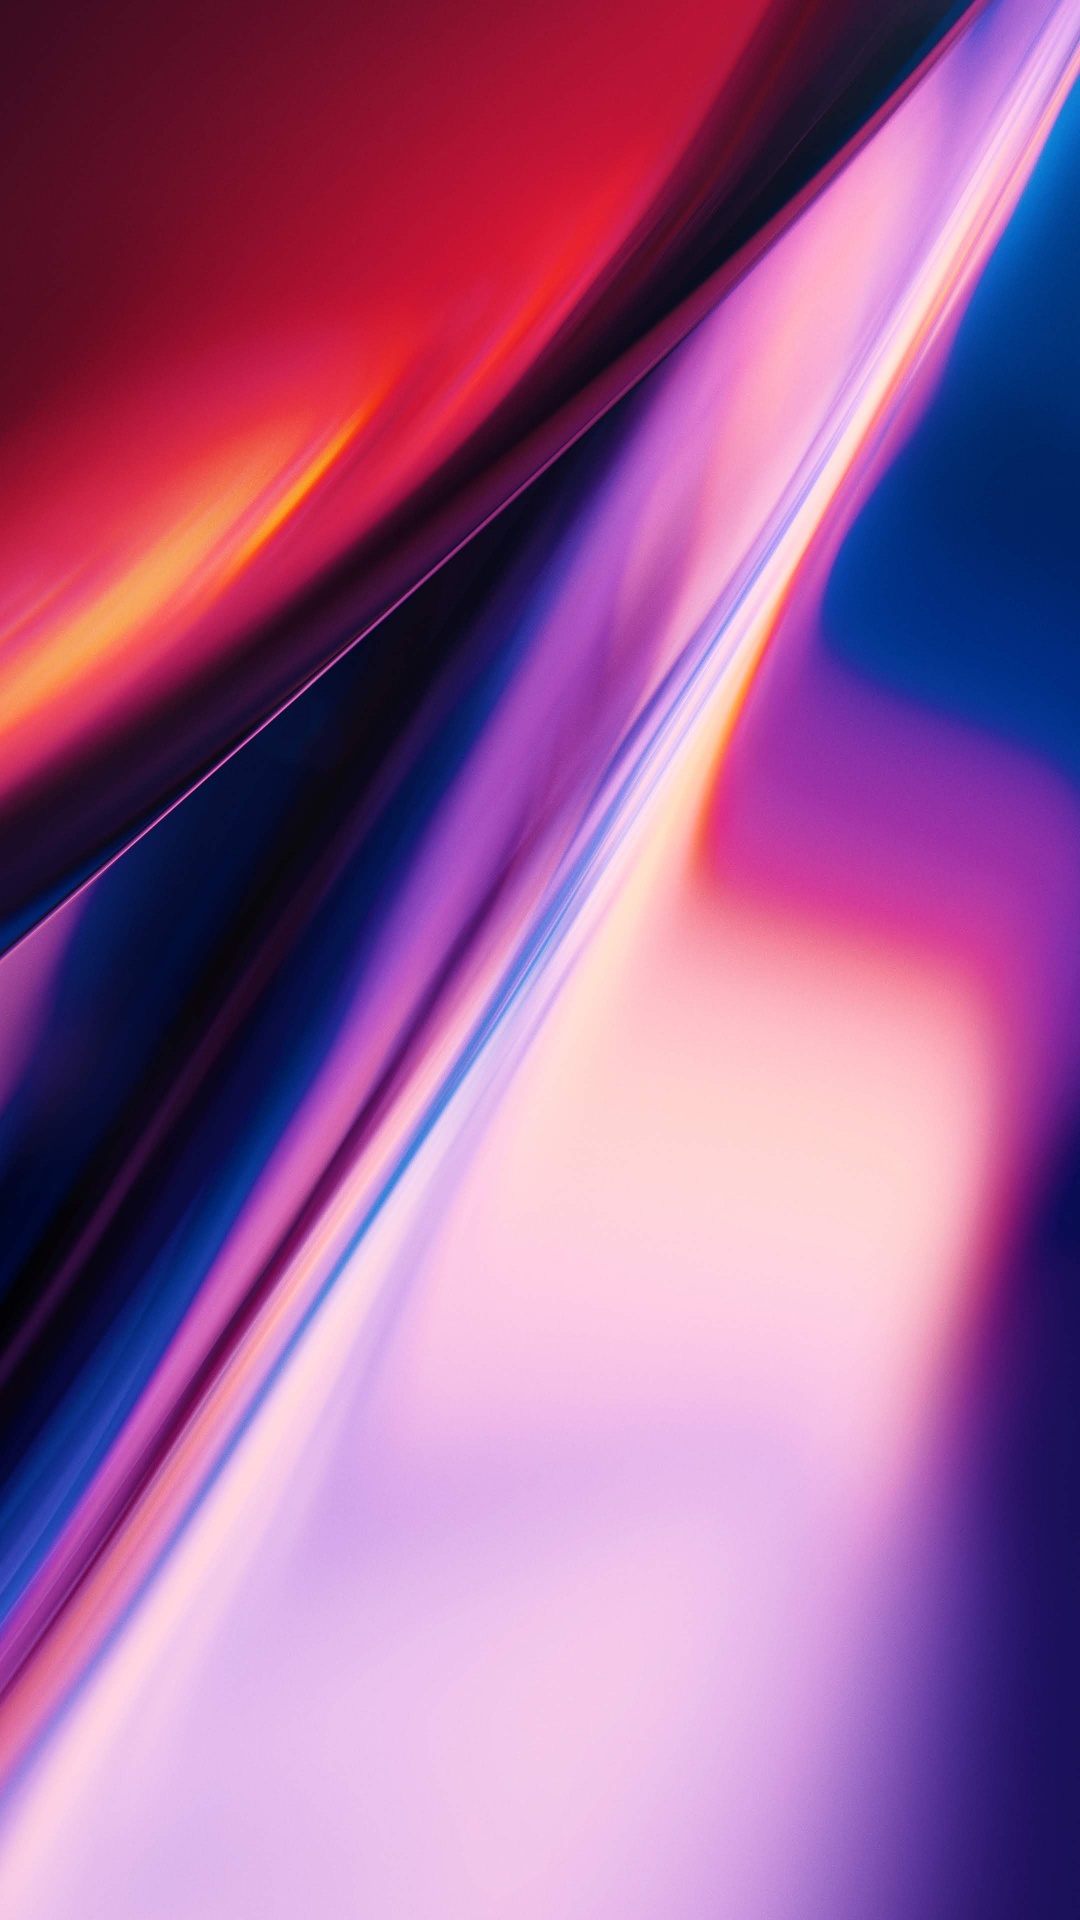 OnePlus 7 Pro, Oneplus 7t, Oneplus 8, Android, Colorfulness. Wallpaper in 1080x1920 Resolution